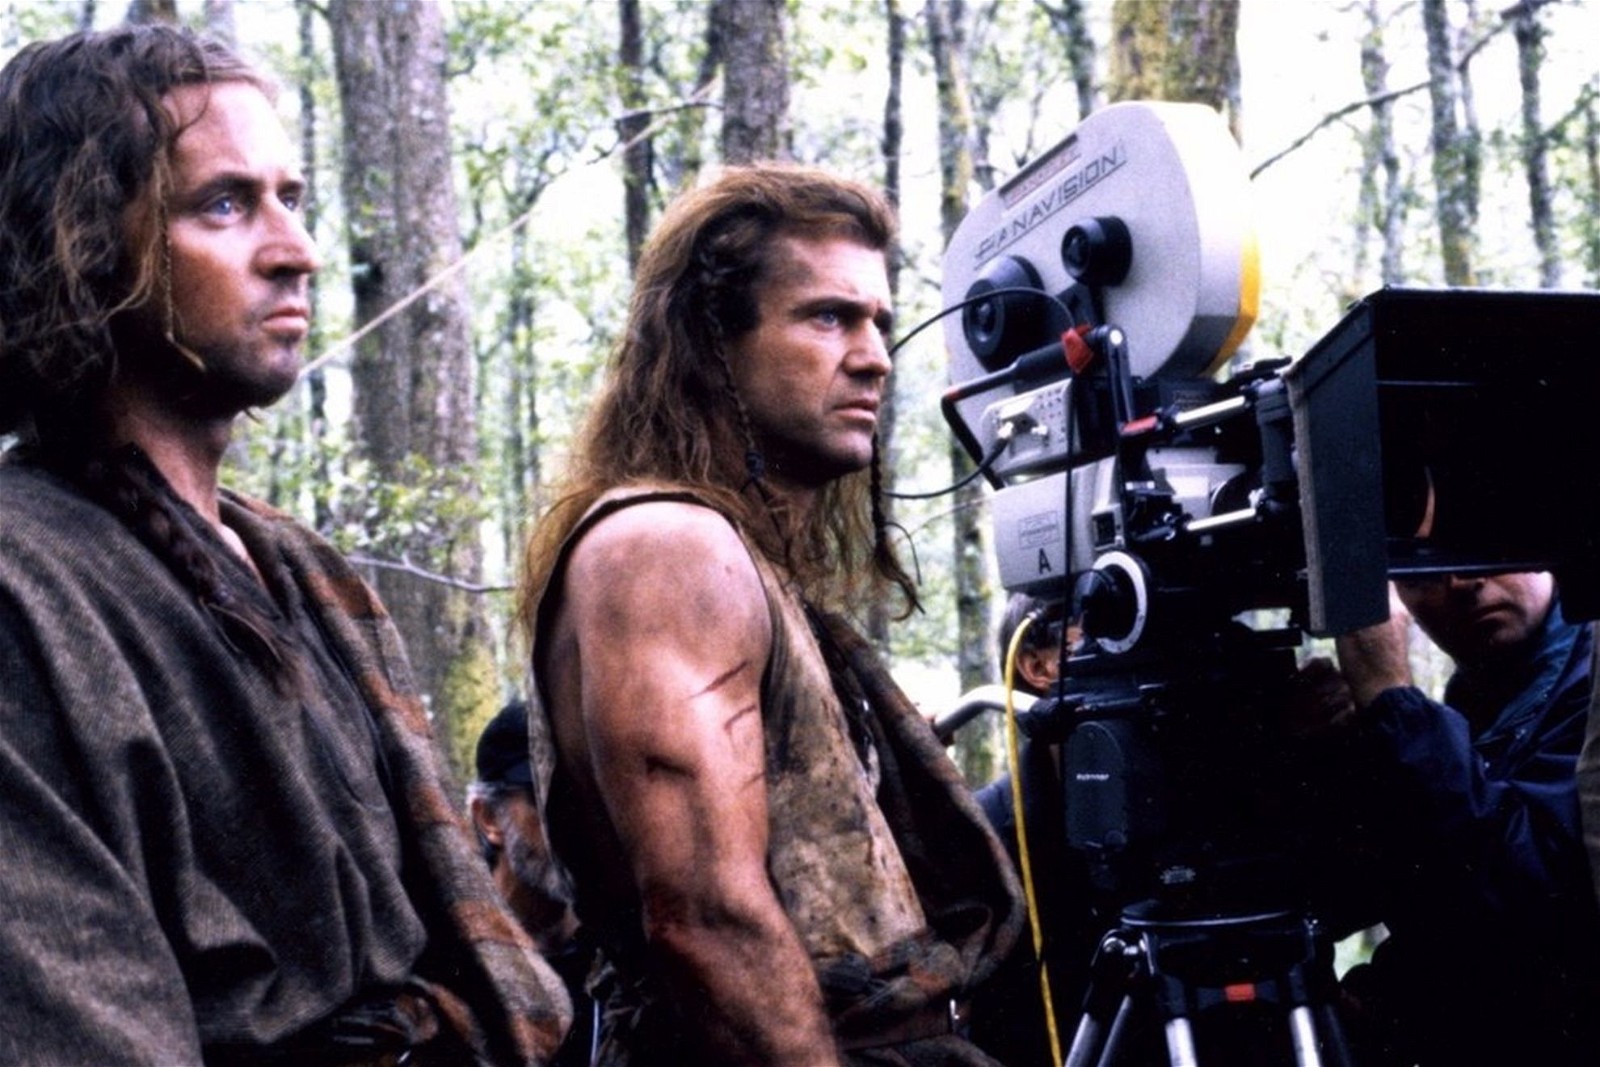 The brothers starred together in Braveheart